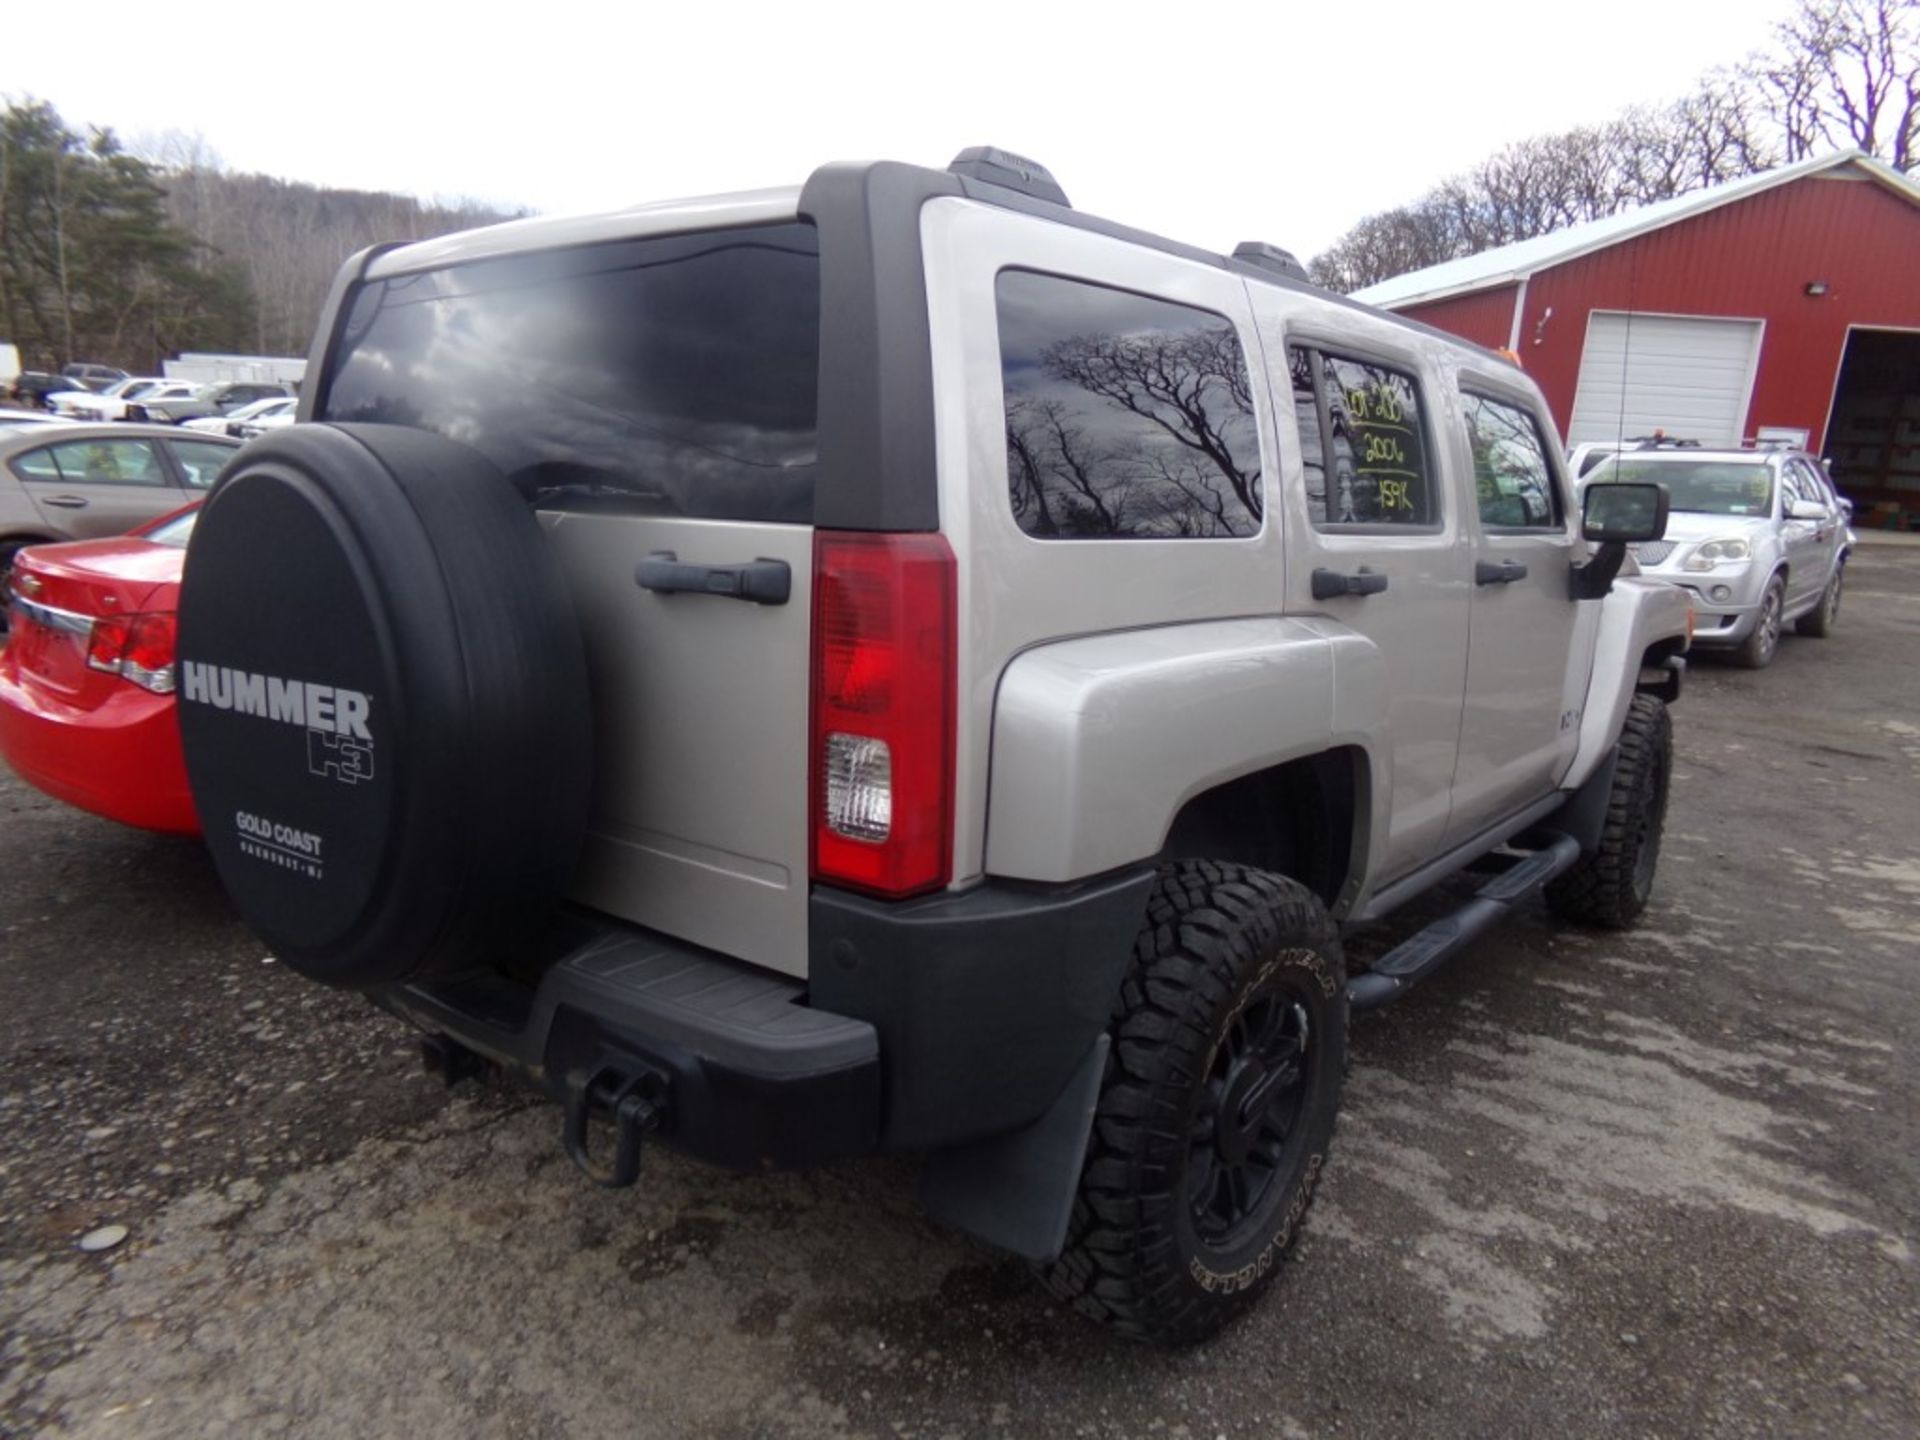 2006 Hummer H3, Sunroof,Gray, 159,522 Miles, VIN#: 5GTDN136768171999 - Remote Auto Start,New - Image 3 of 11